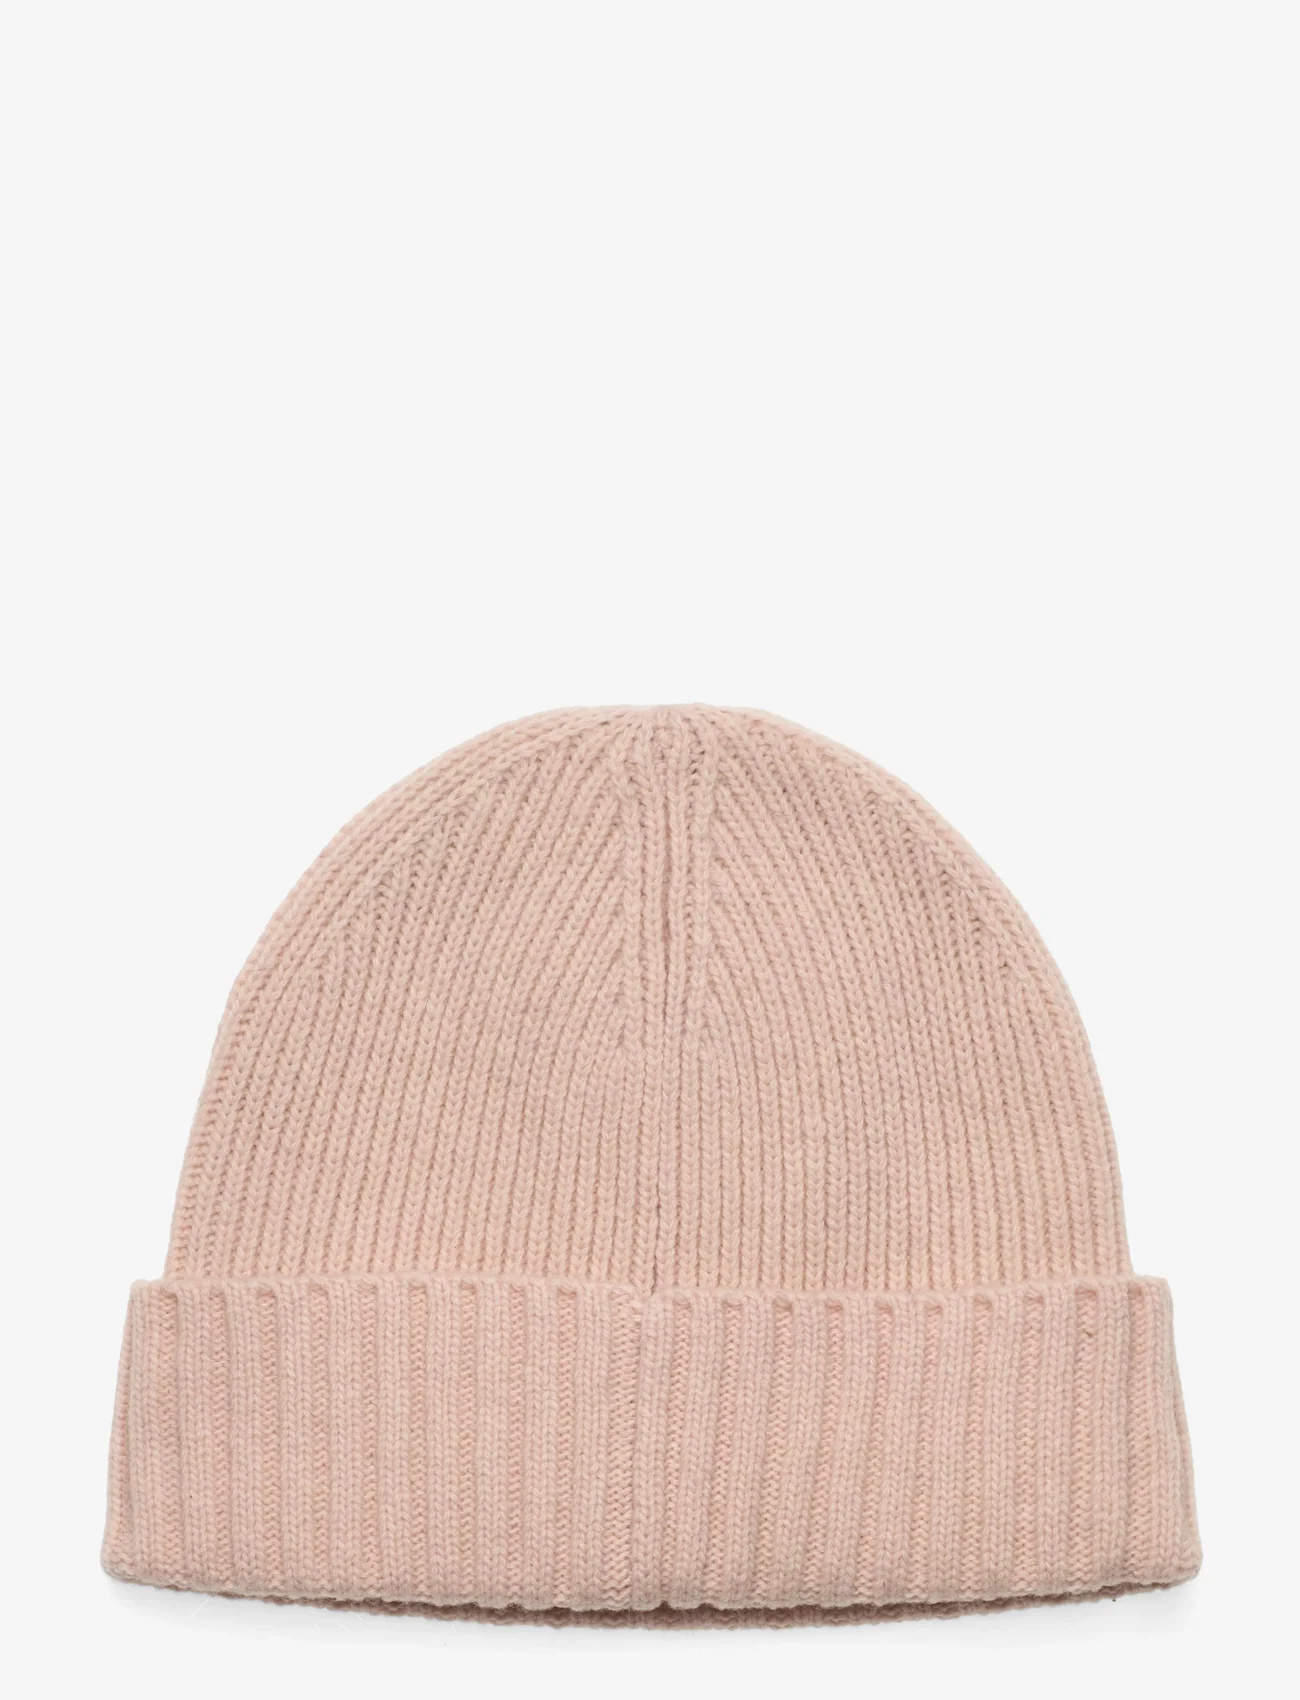 GANT - D1. WOOL LINED BEANIE - silver peony - 1